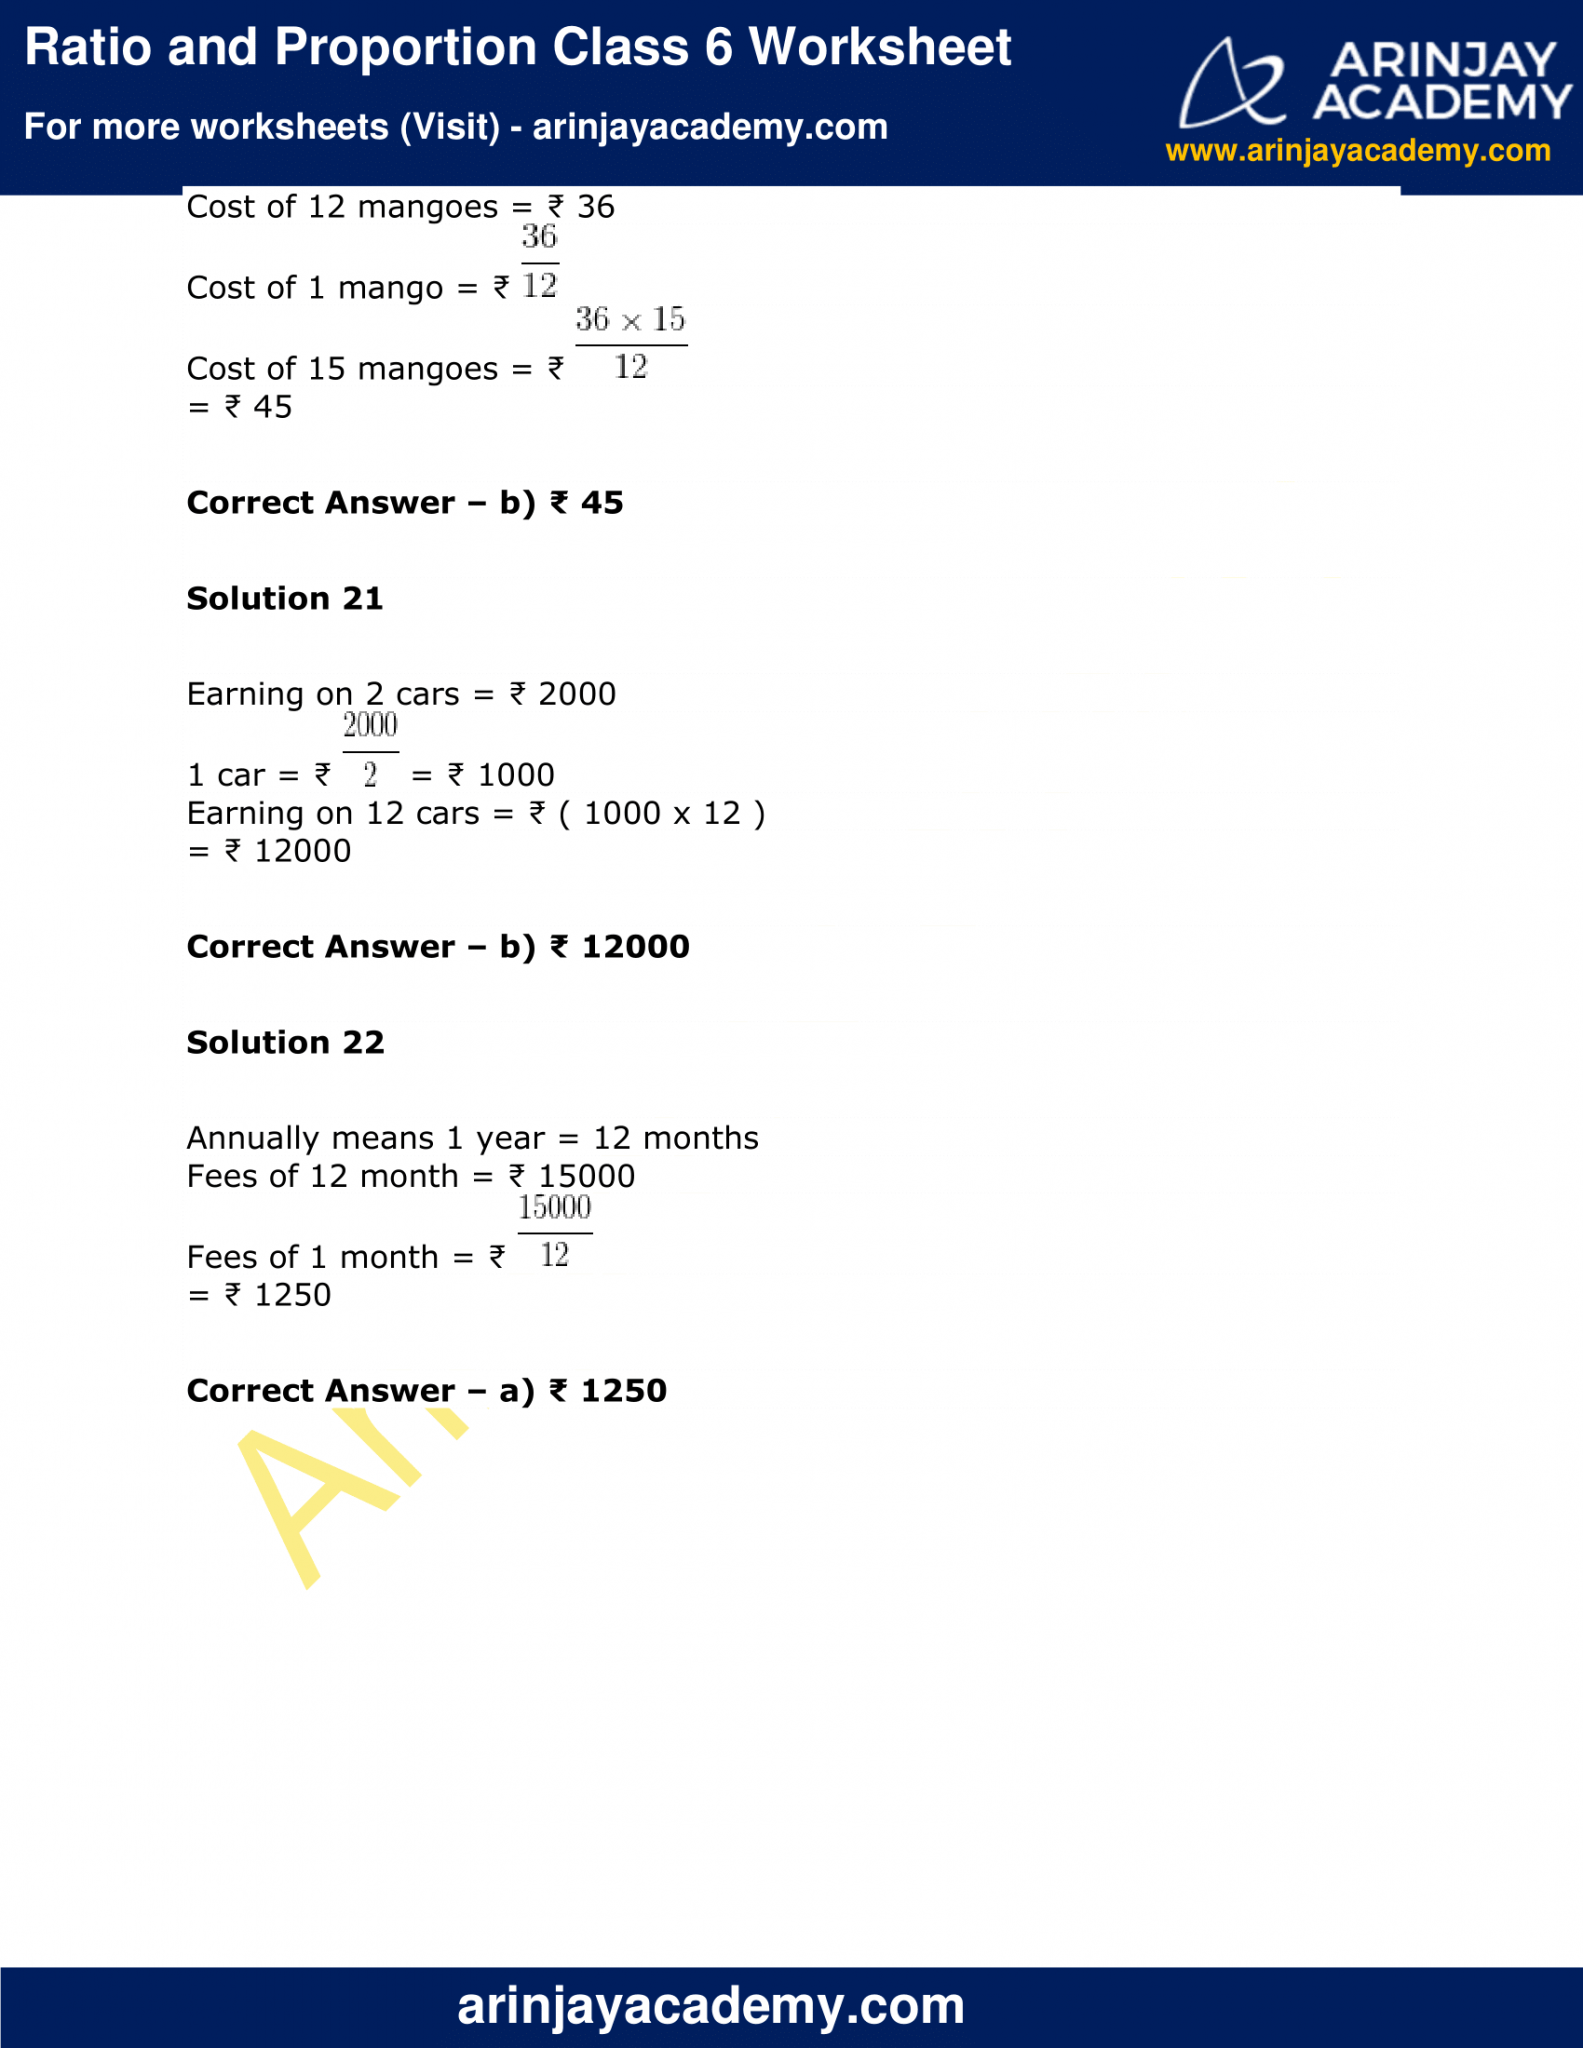 ratio-and-proportion-class-6-worksheet-arinjay-academy